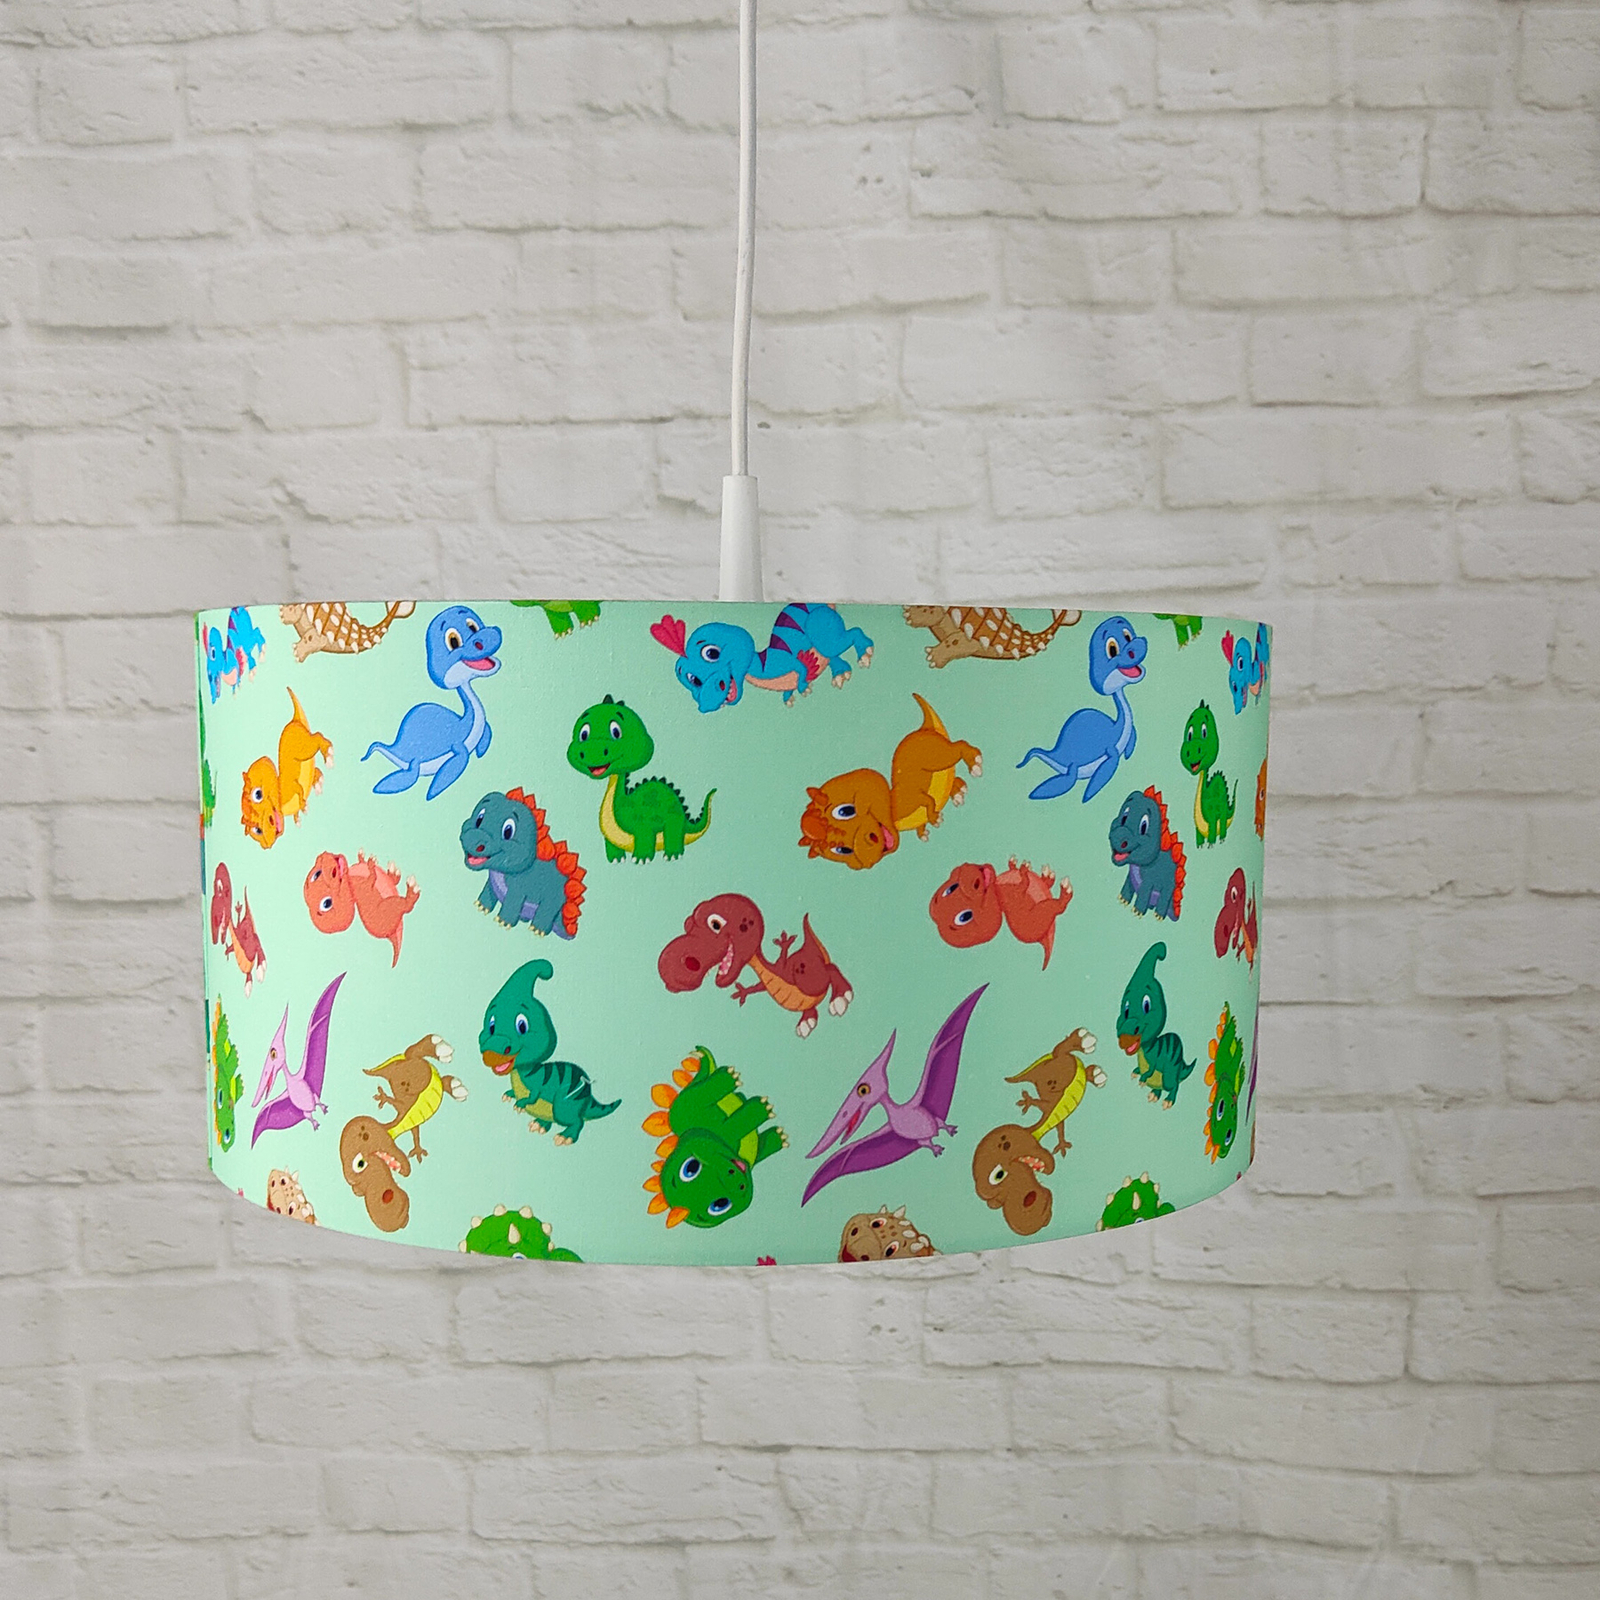 Dinos pendant light with a fabric lampshade